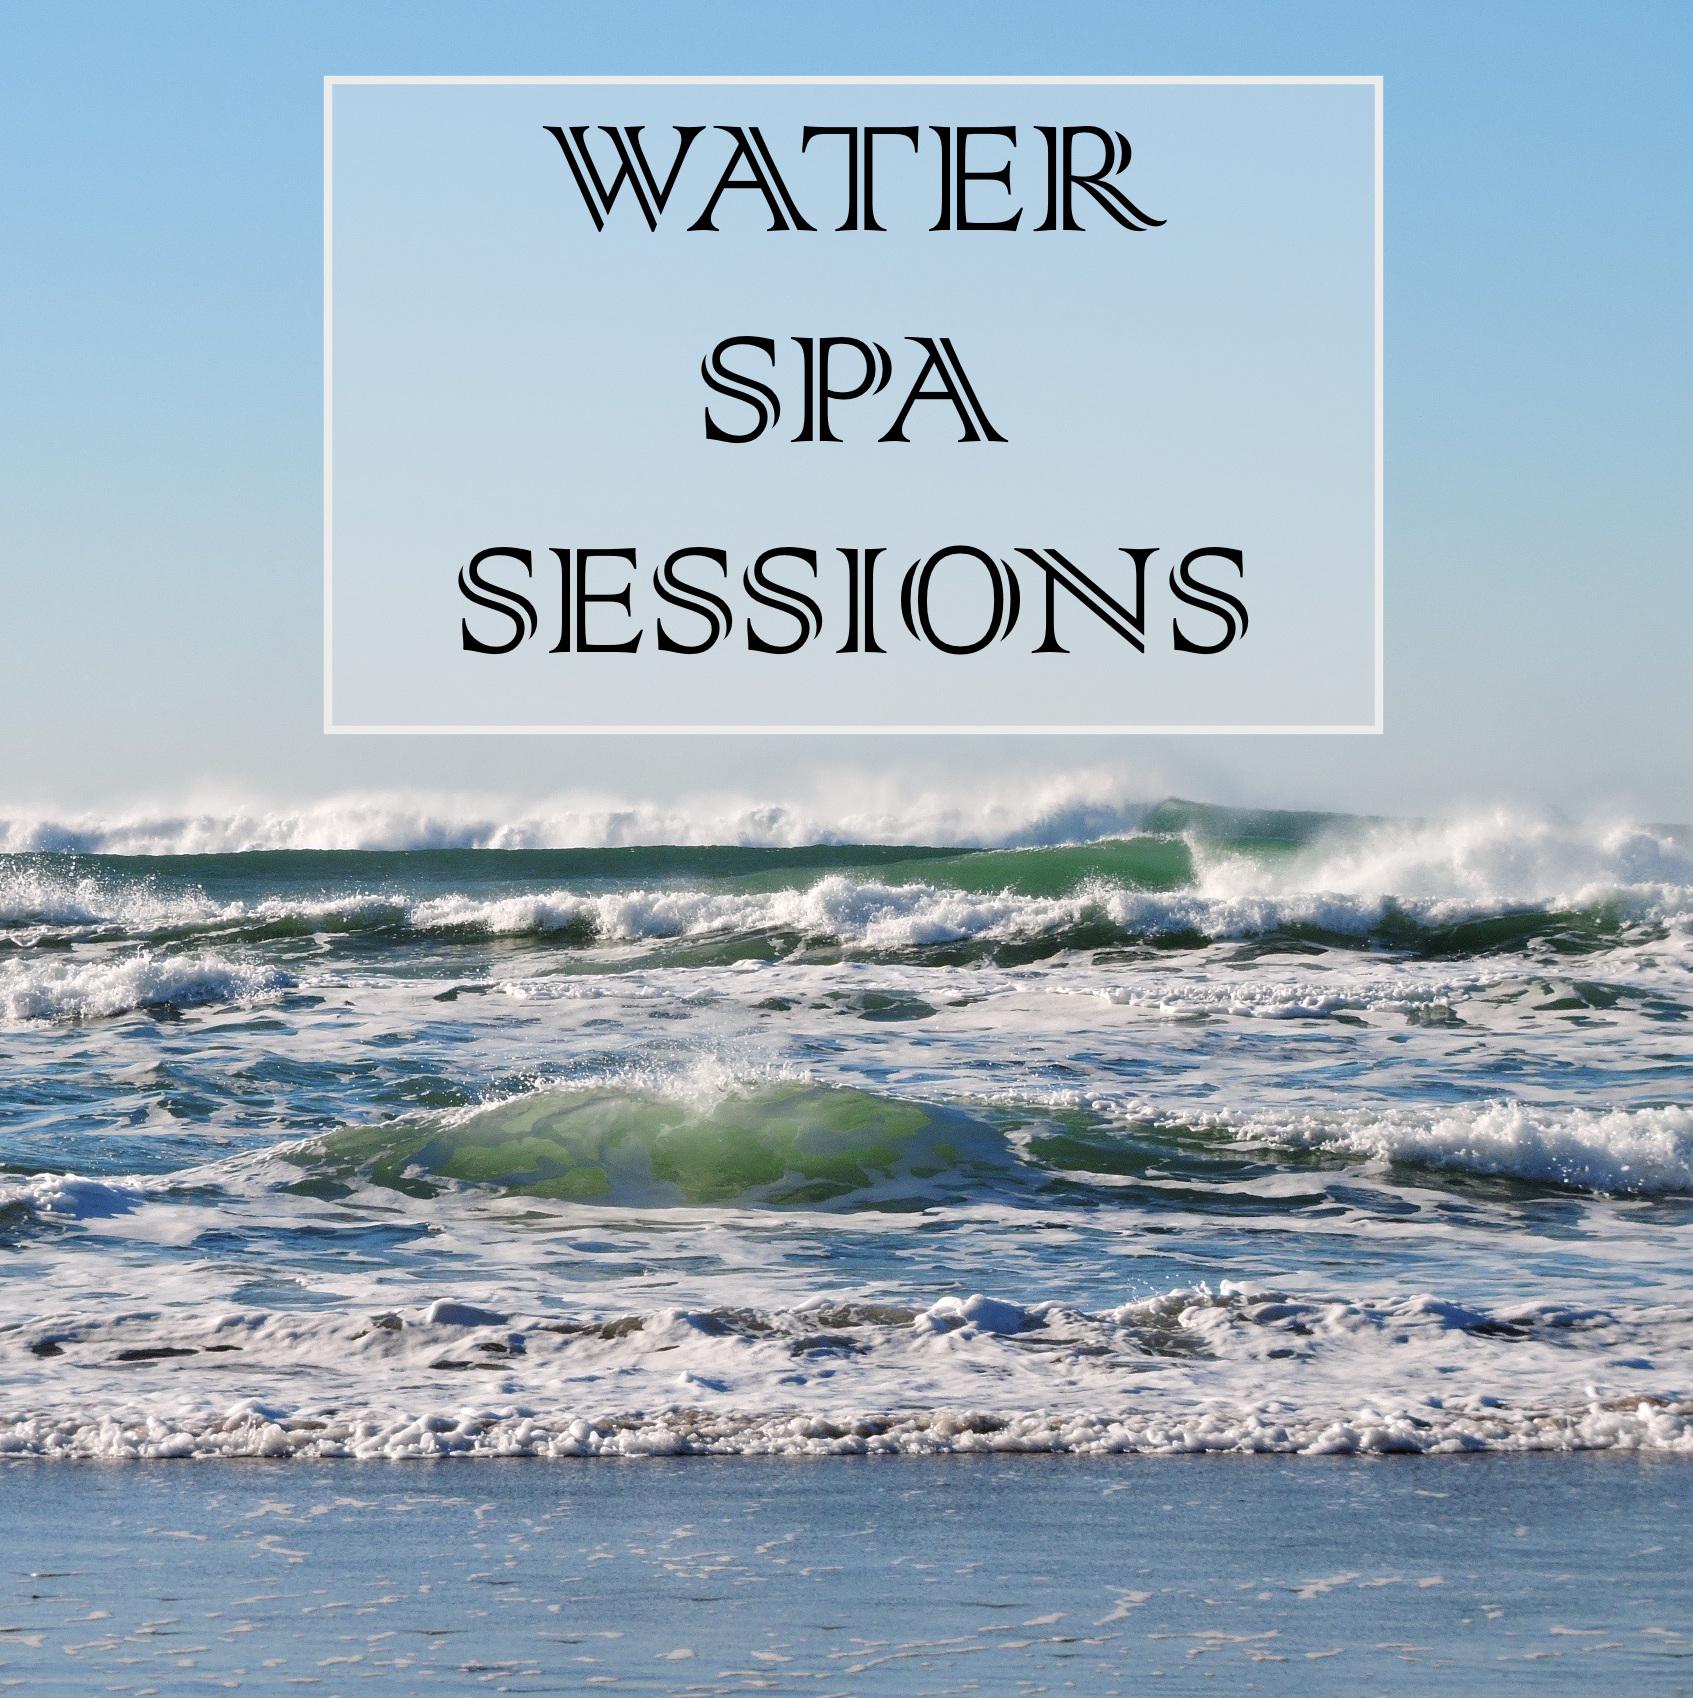 Water Spa Sessions - Deep Relaxation Compilation to Relieve Stress & Anxiety and for Yoga, Meditation, Study Focus and Better Mental Health